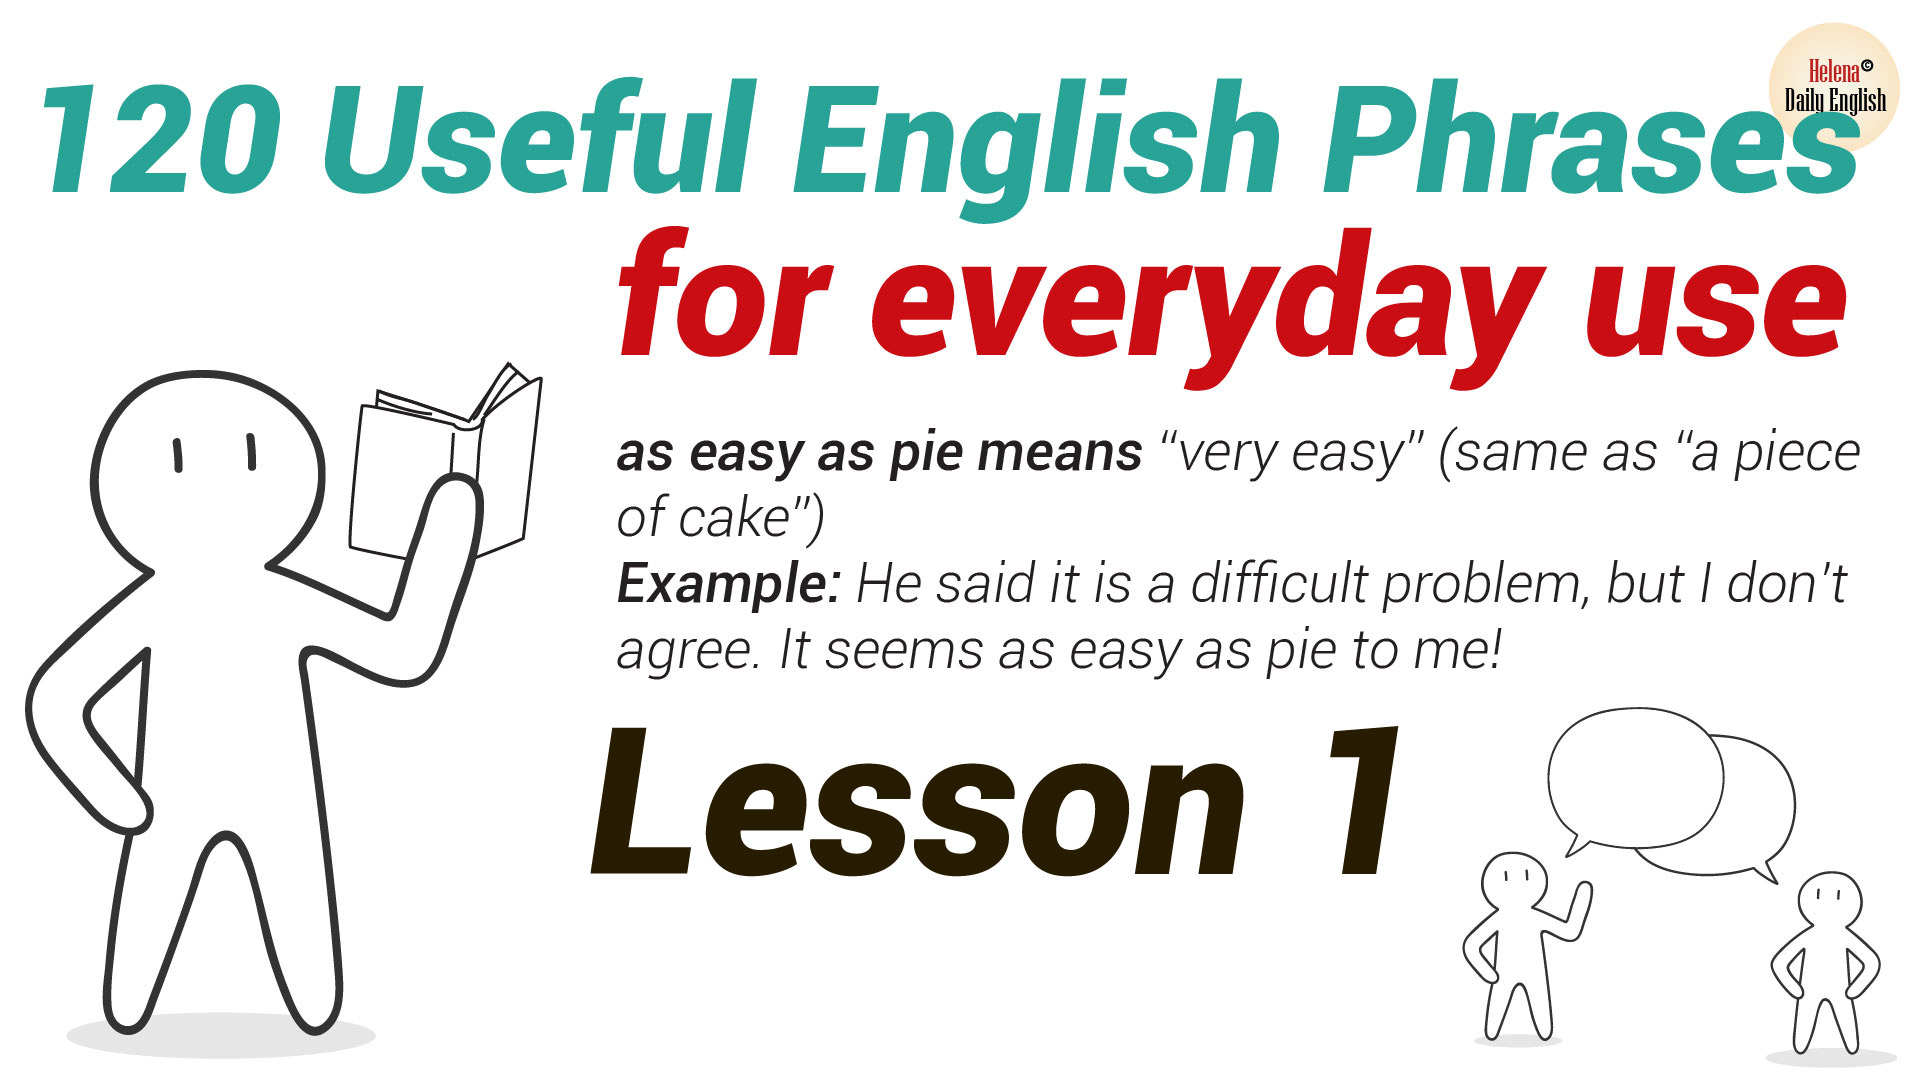 Common English Phrases - 120 Useful English Phrases for Everyday